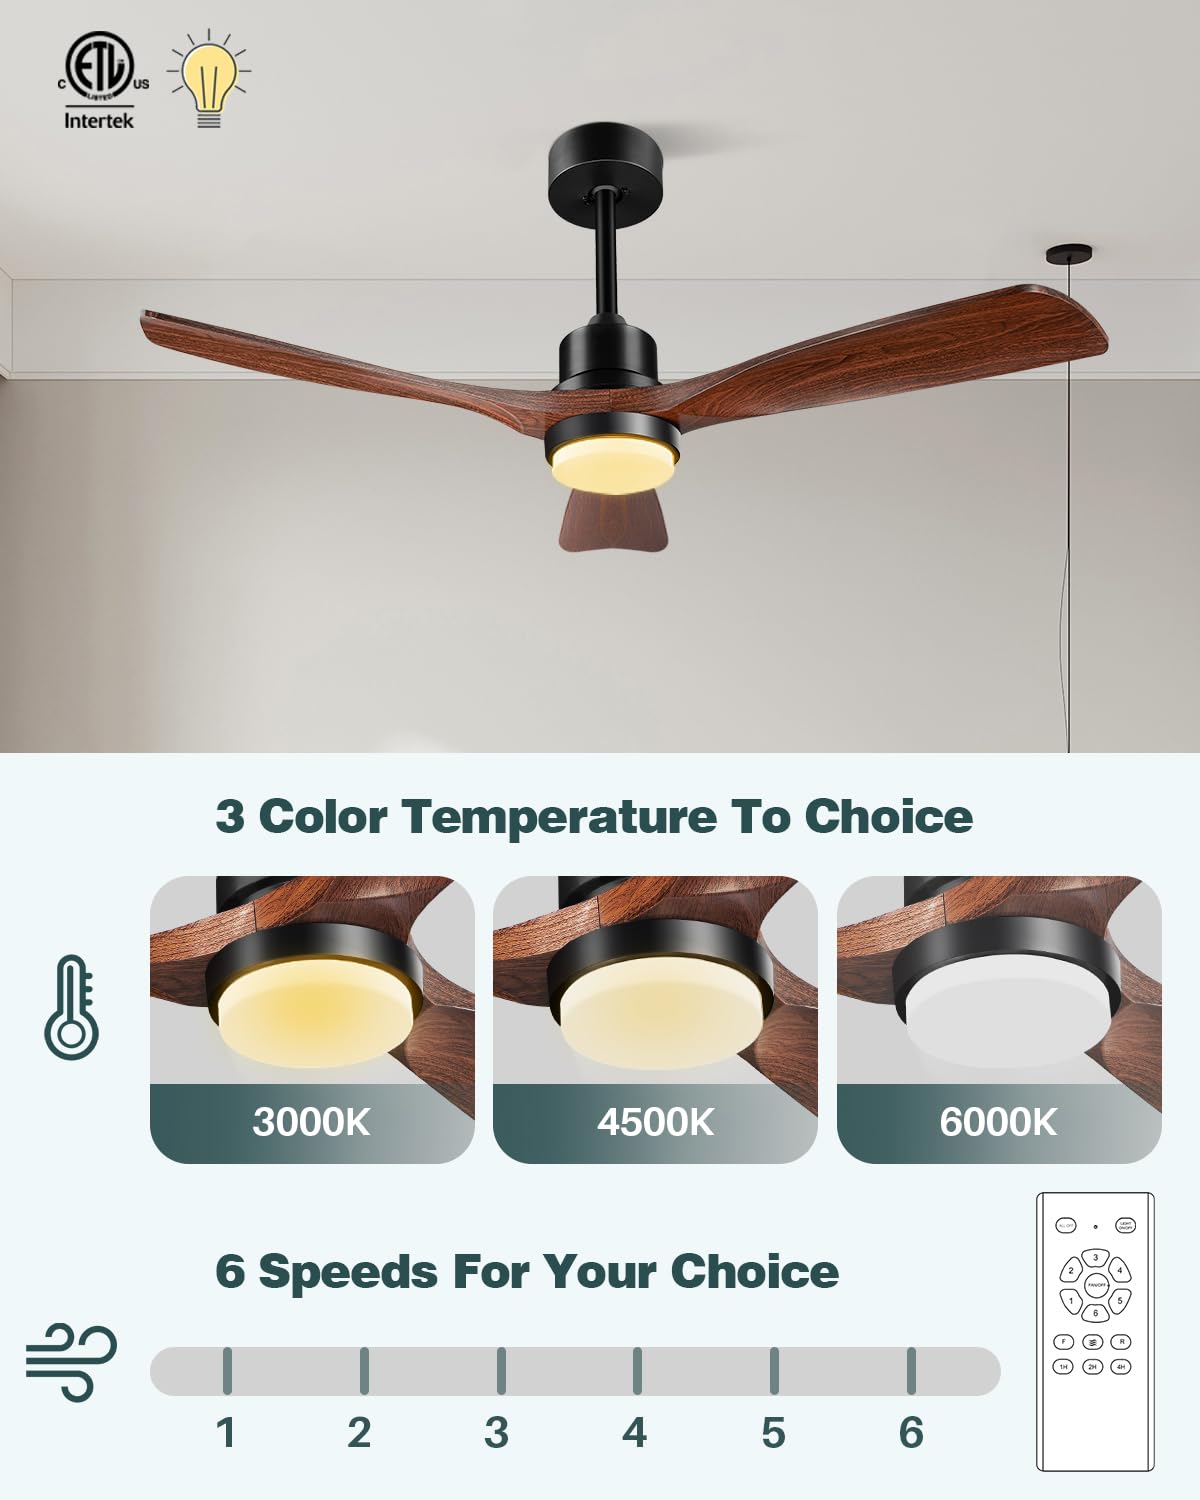 Forrovenco Ceiling Fans with Lights and Remote, 52 Inch Outdoor Ceiling Fan